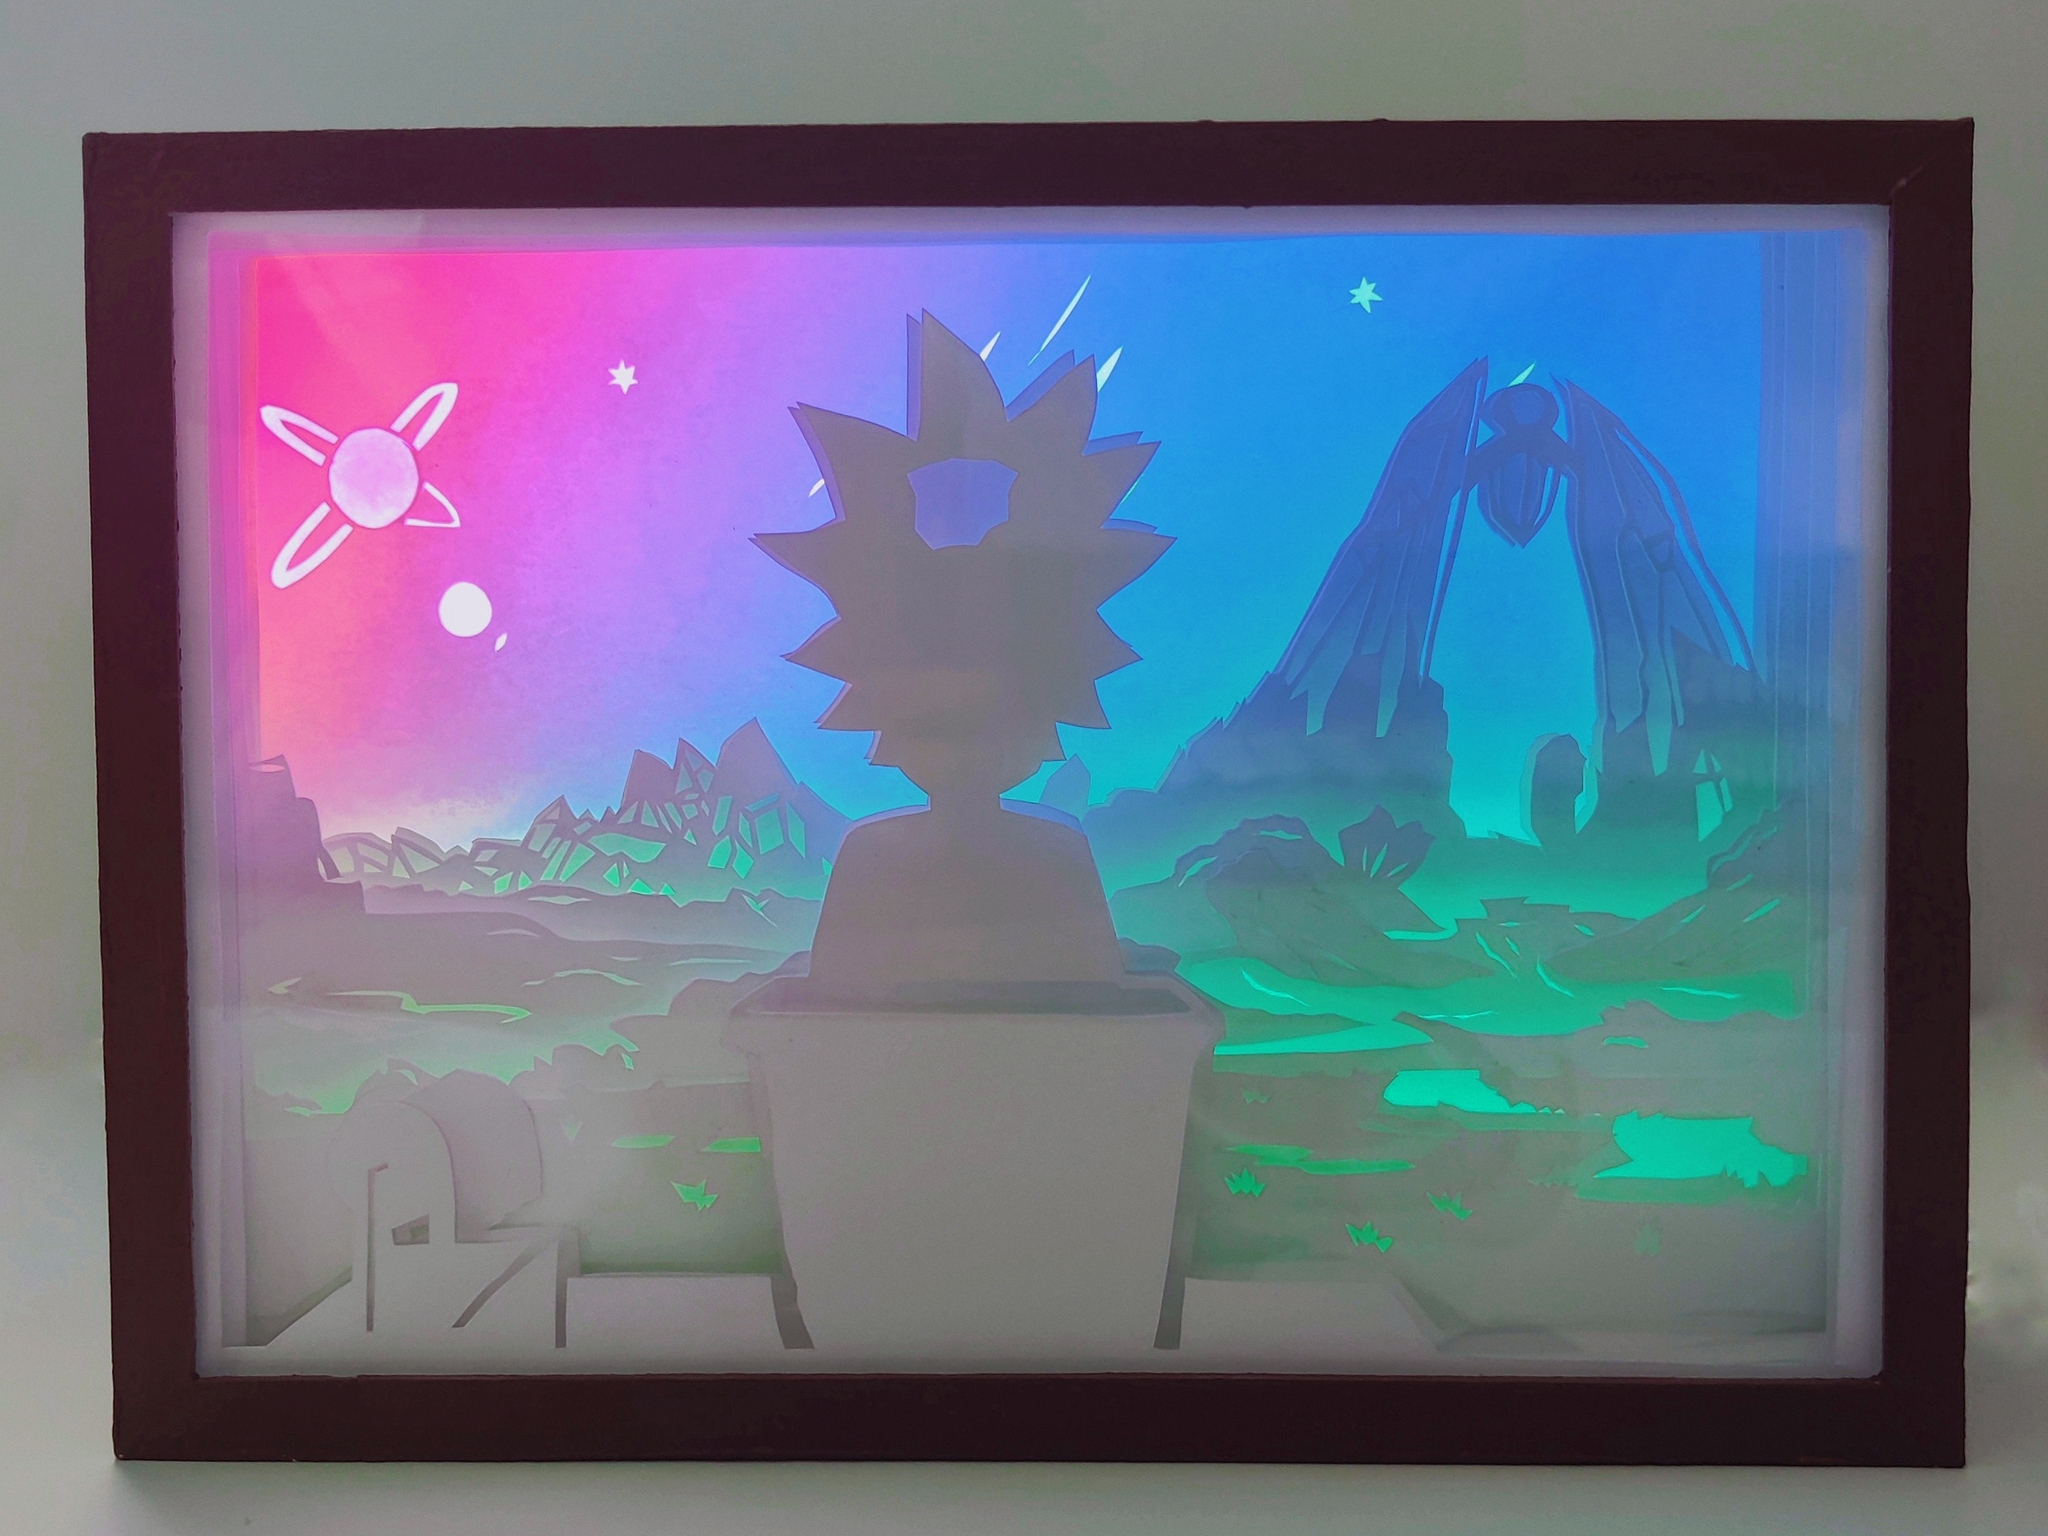 Favorite scene from Rick and Morty - My, Needlework, Handmade, Needlework without process, Animated series, LED lights, Lamp, Hobby, Creation, Art, Longpost, Rick and Morty